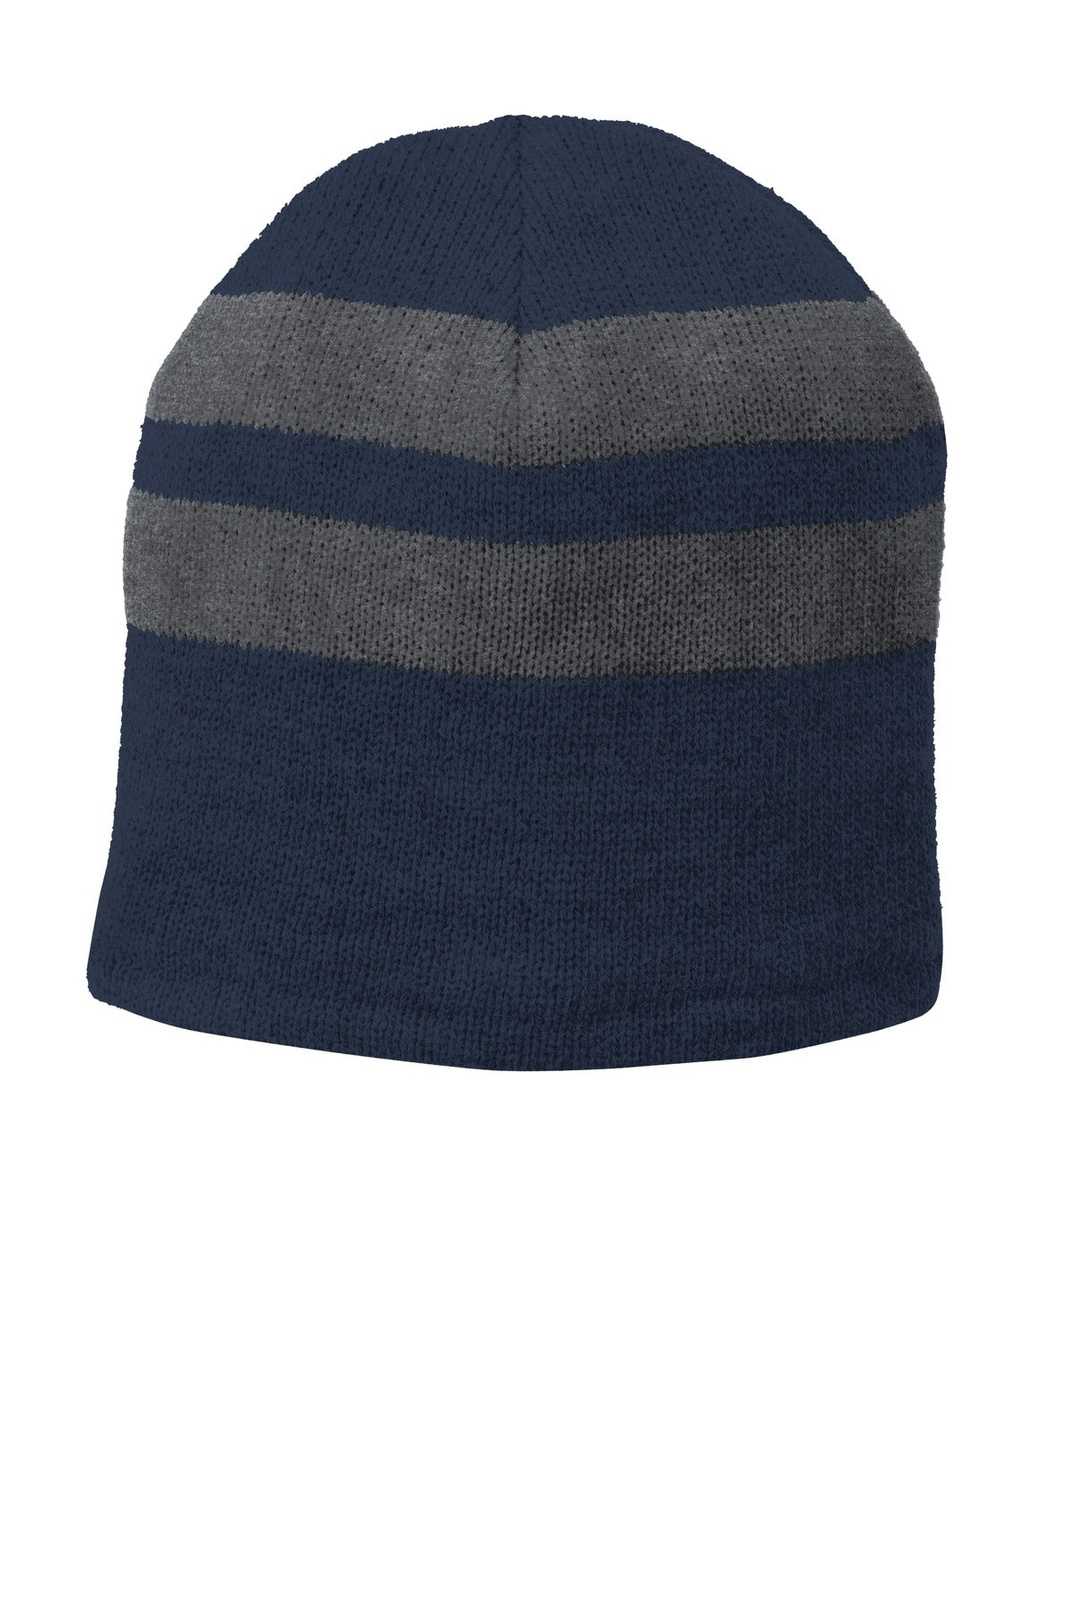 Port &amp; Company C922 Fleece-Lined Striped Beanie Cap - Navy Athletic Oxford - HIT a Double - 1